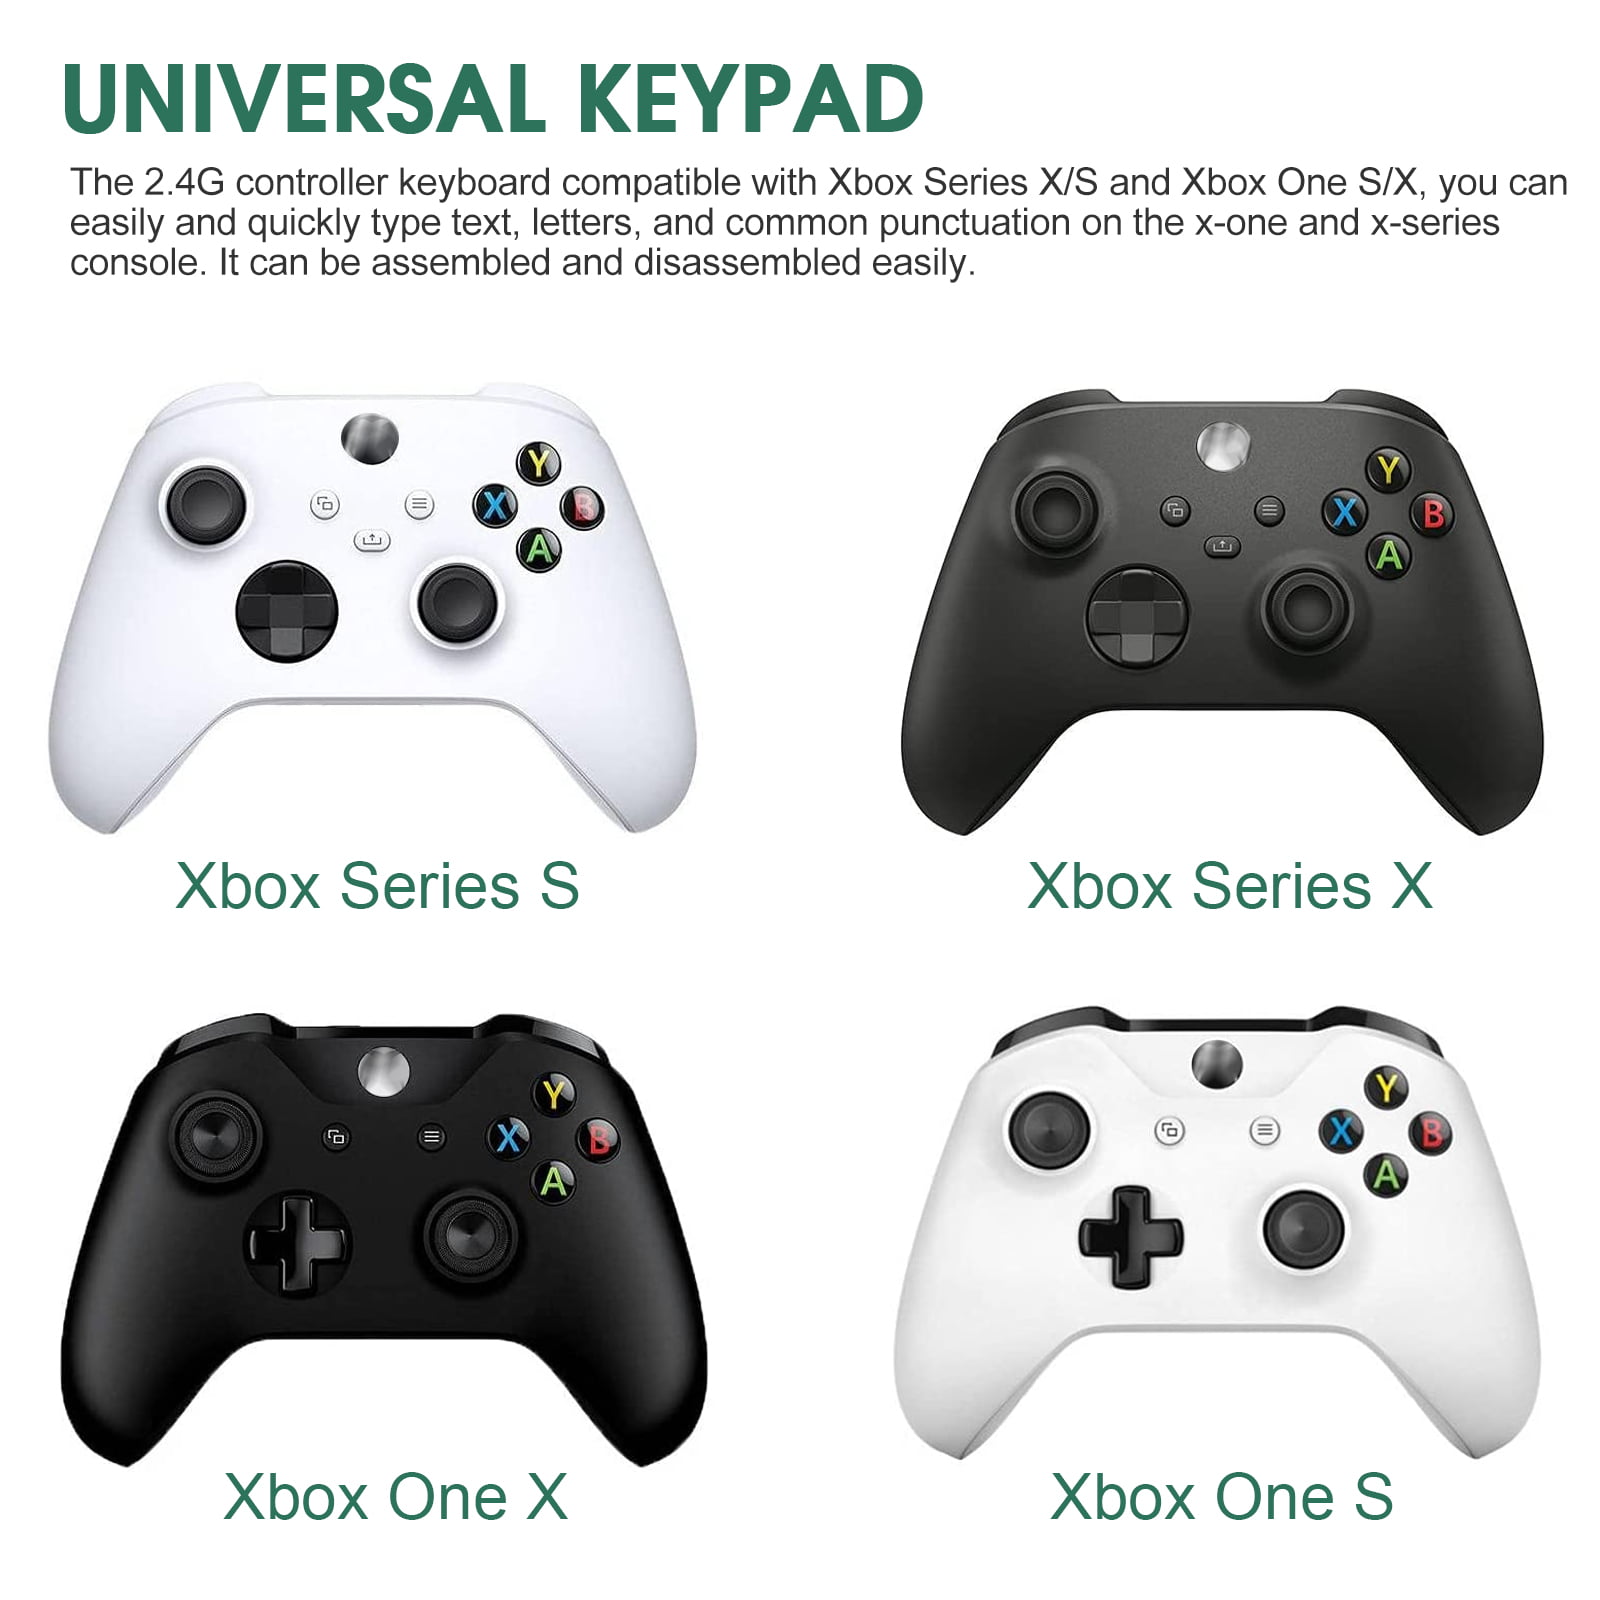 Xbox One Gaming Keyboards, Xbox Series X and S